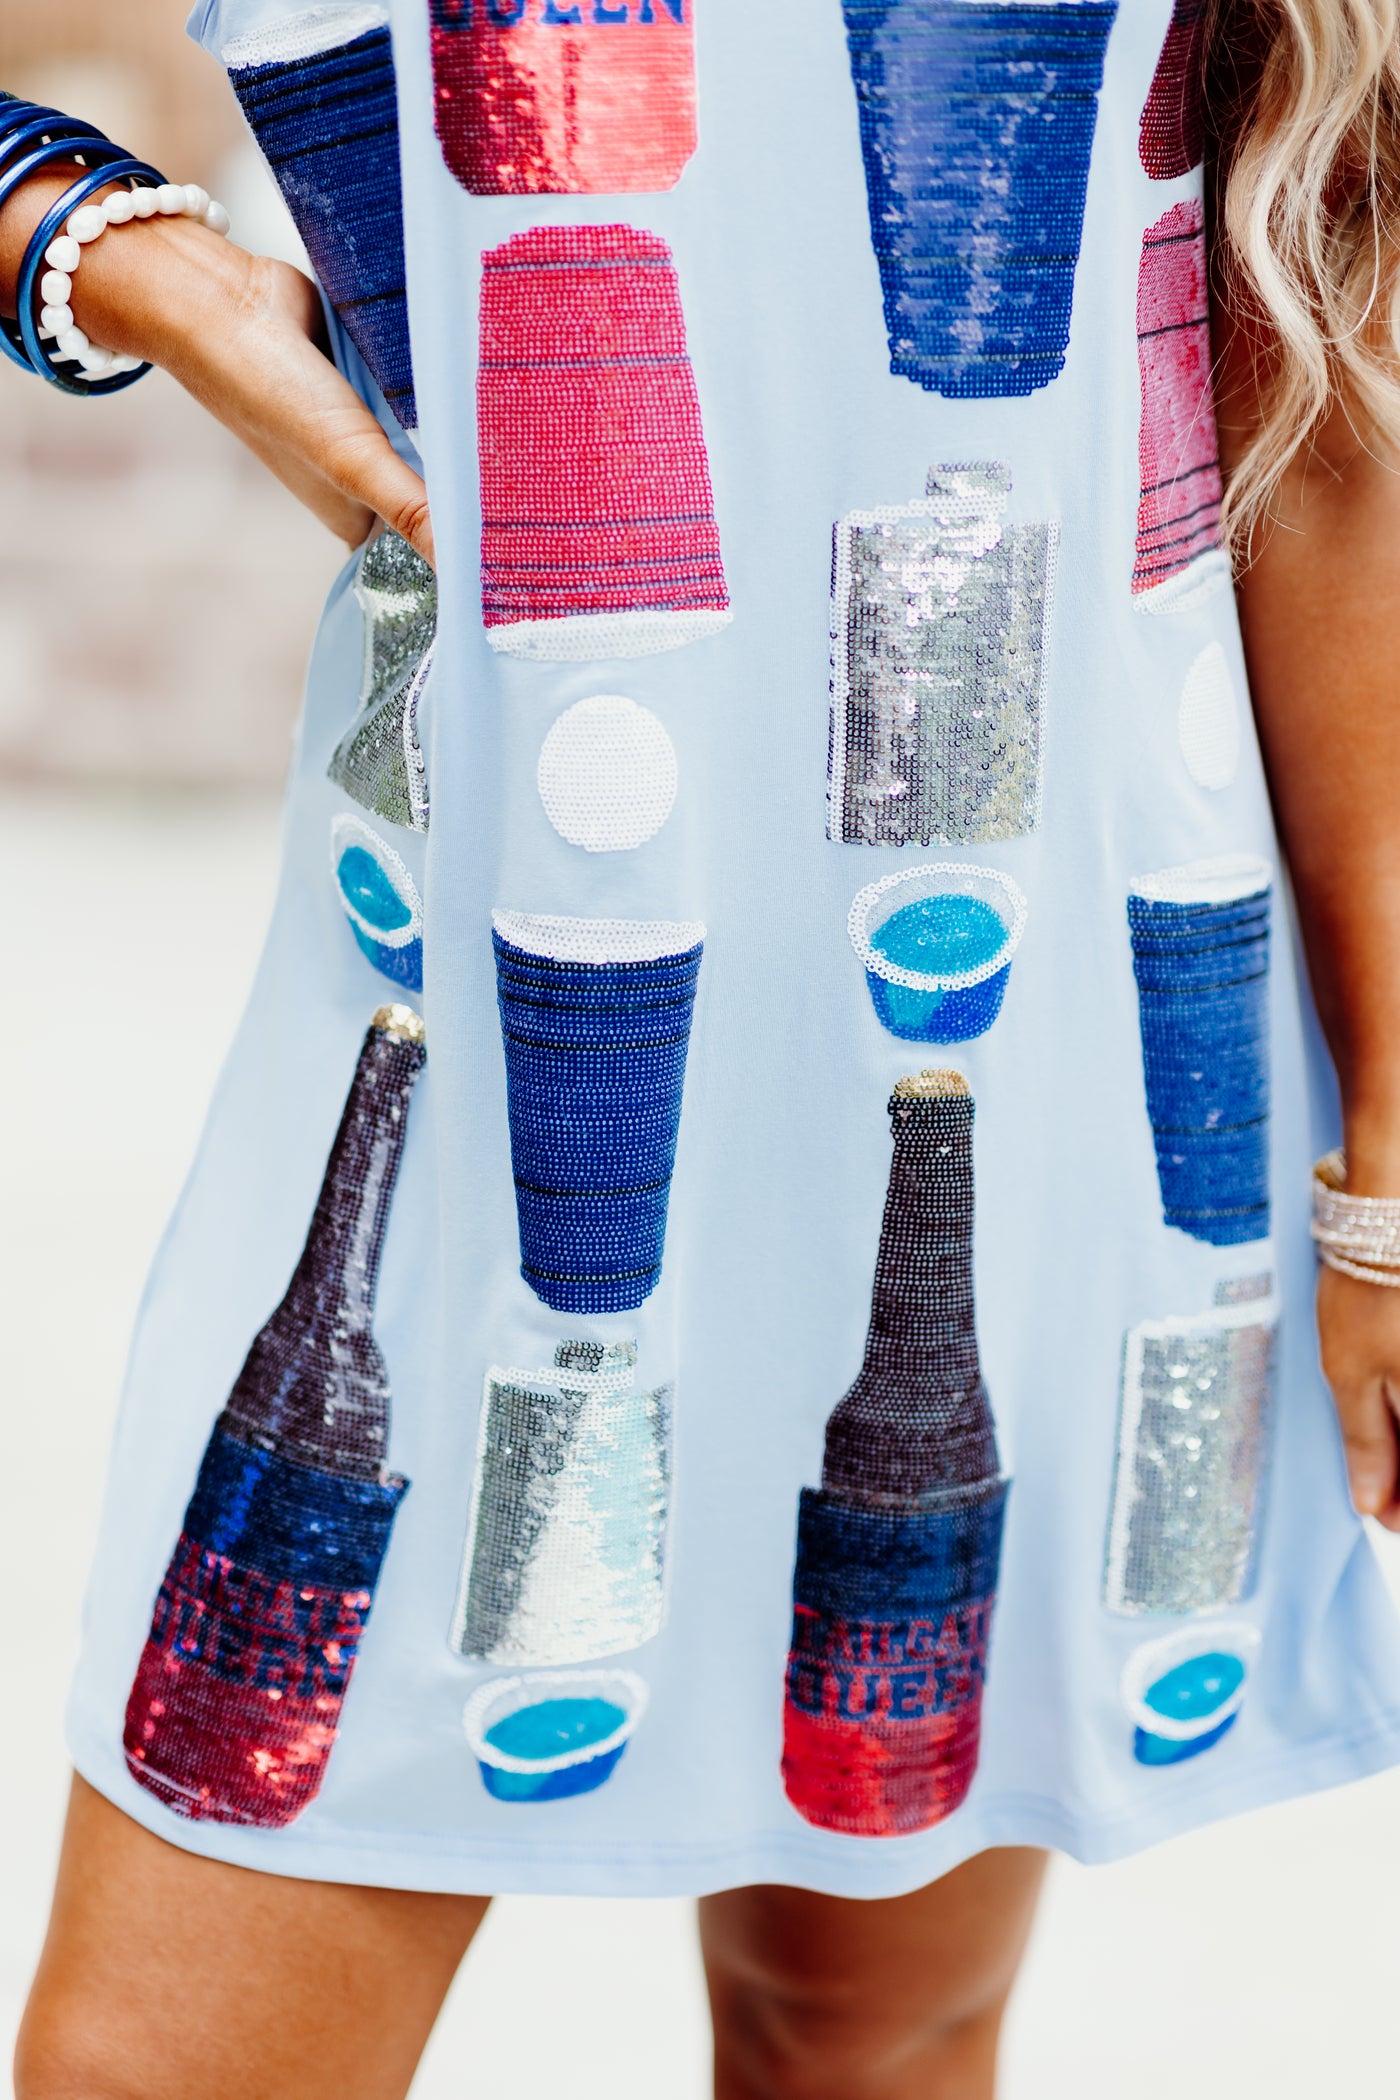 Queen of Sparkles Powder Blue, Red, & Navy All Over Icon Drink Tank Dress